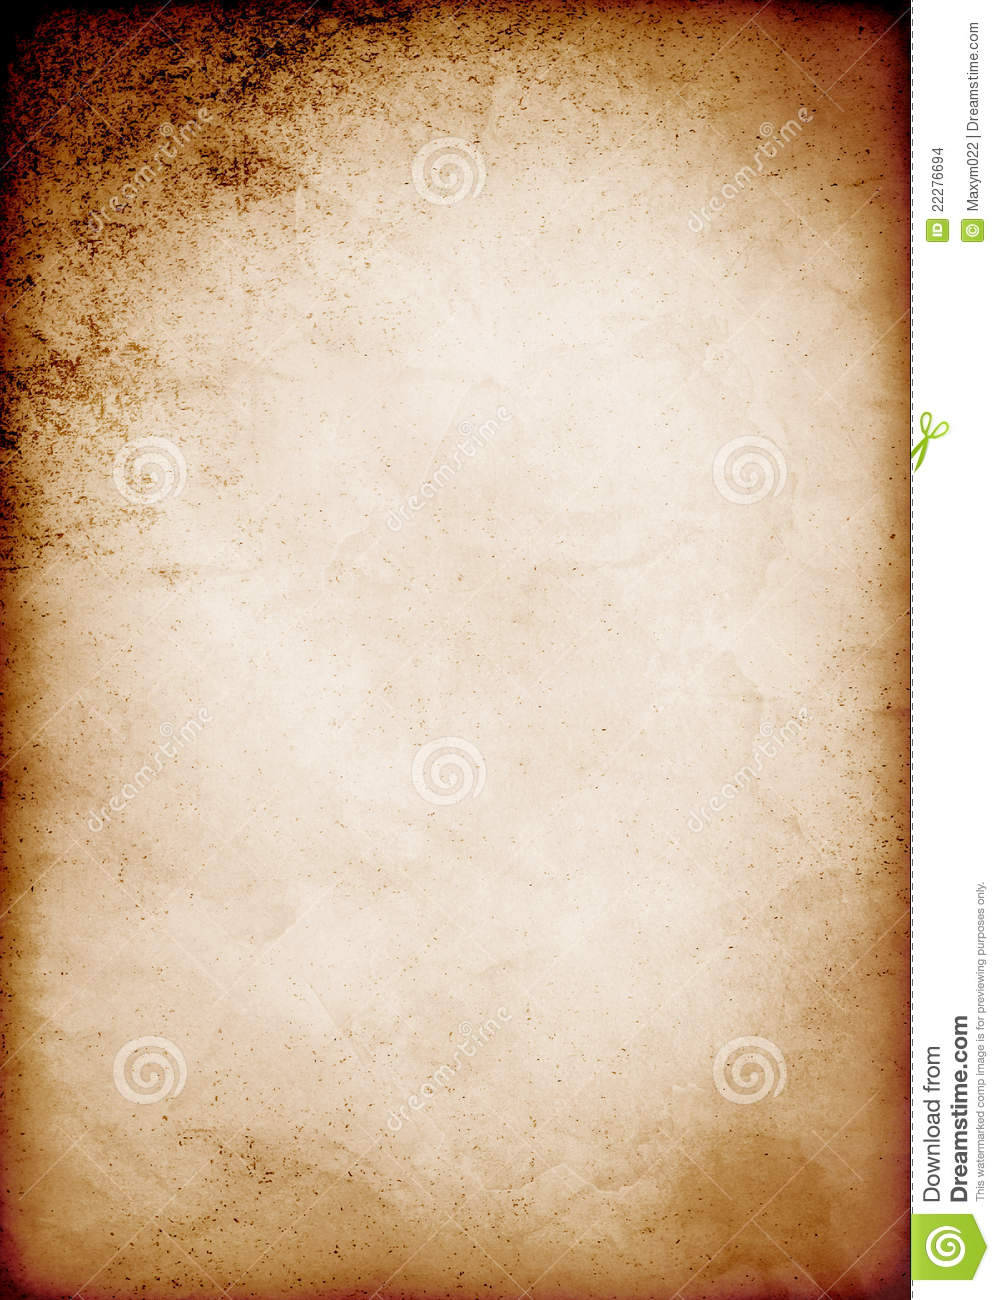 11 Old Paper Template For Word Images - Old Scroll Paper Template For Old Blank Newspaper Template